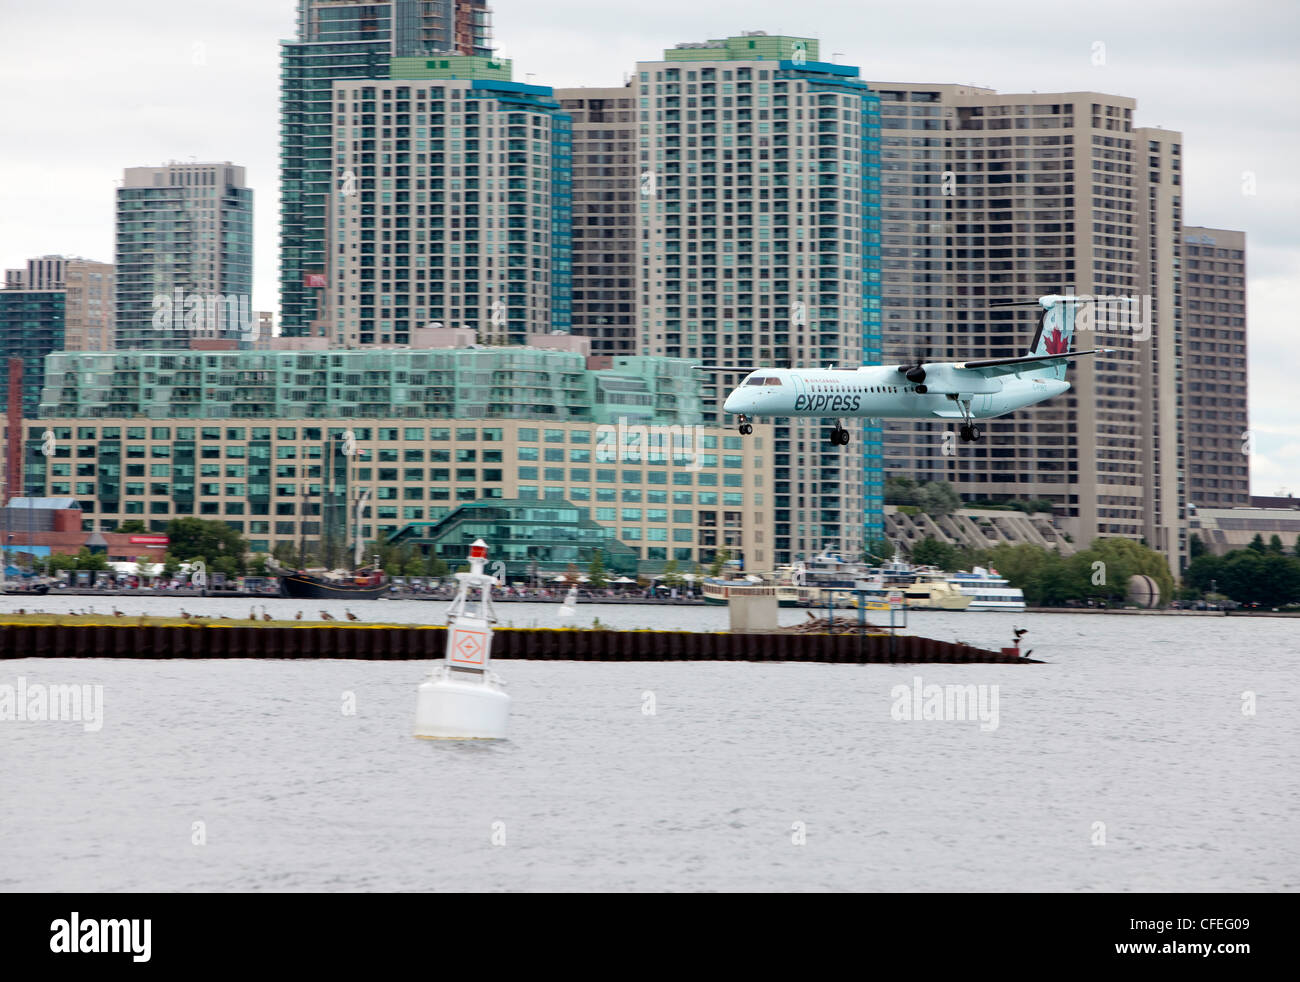 Air Canada airplane arriving to Toronto Island Airport Stock Photo